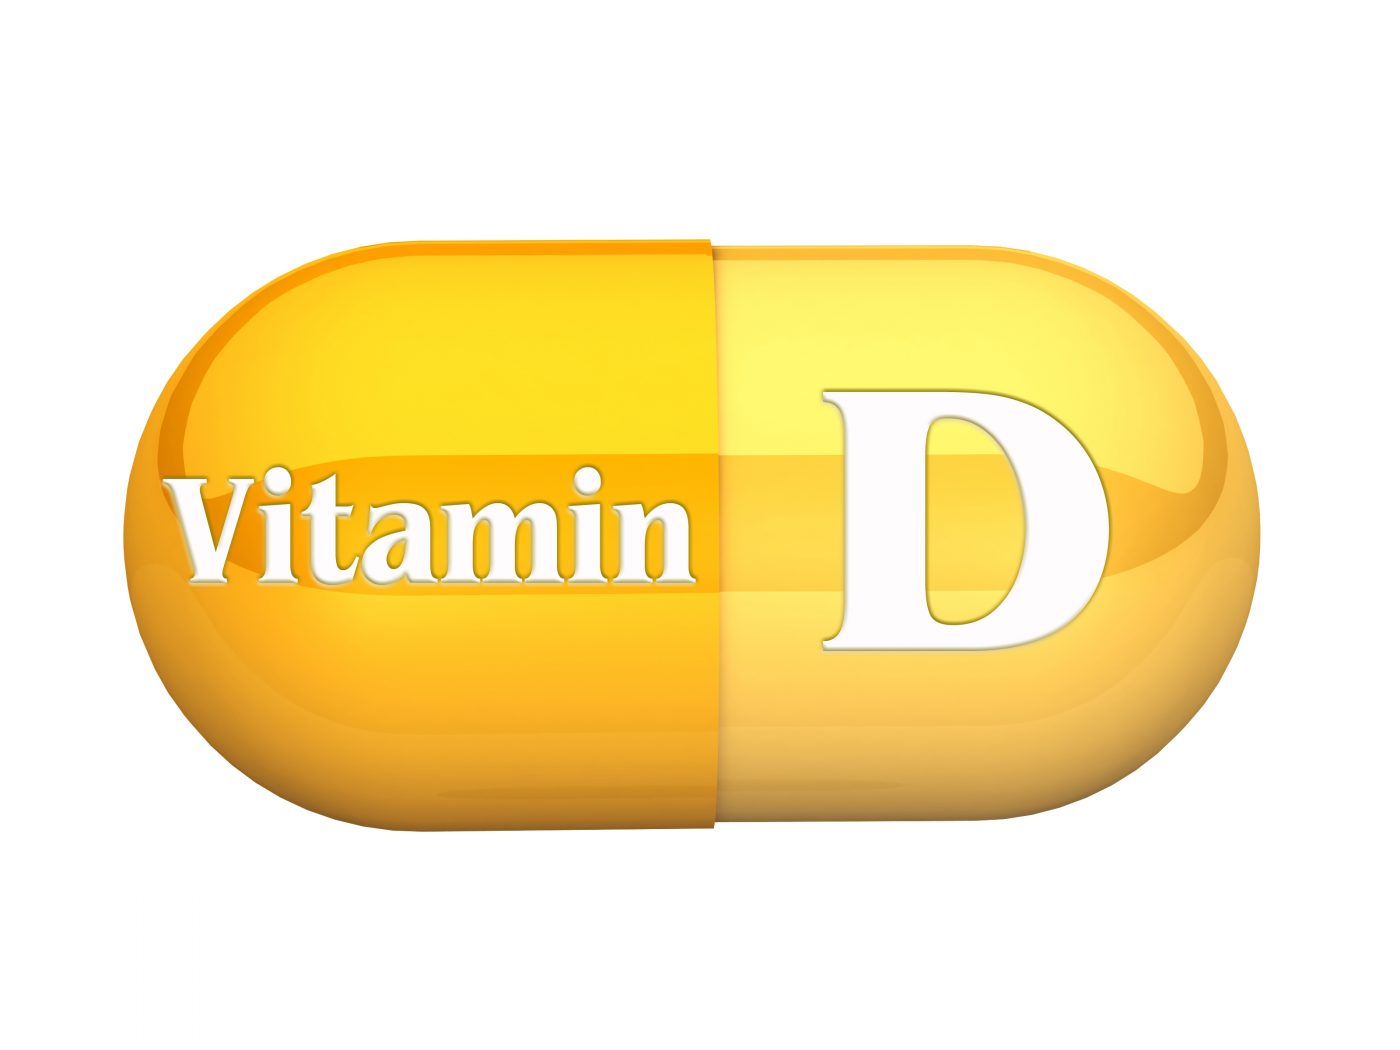 Supplementation Increases Vitamin D Levels in SLE, Does Not Affect Gene Signature